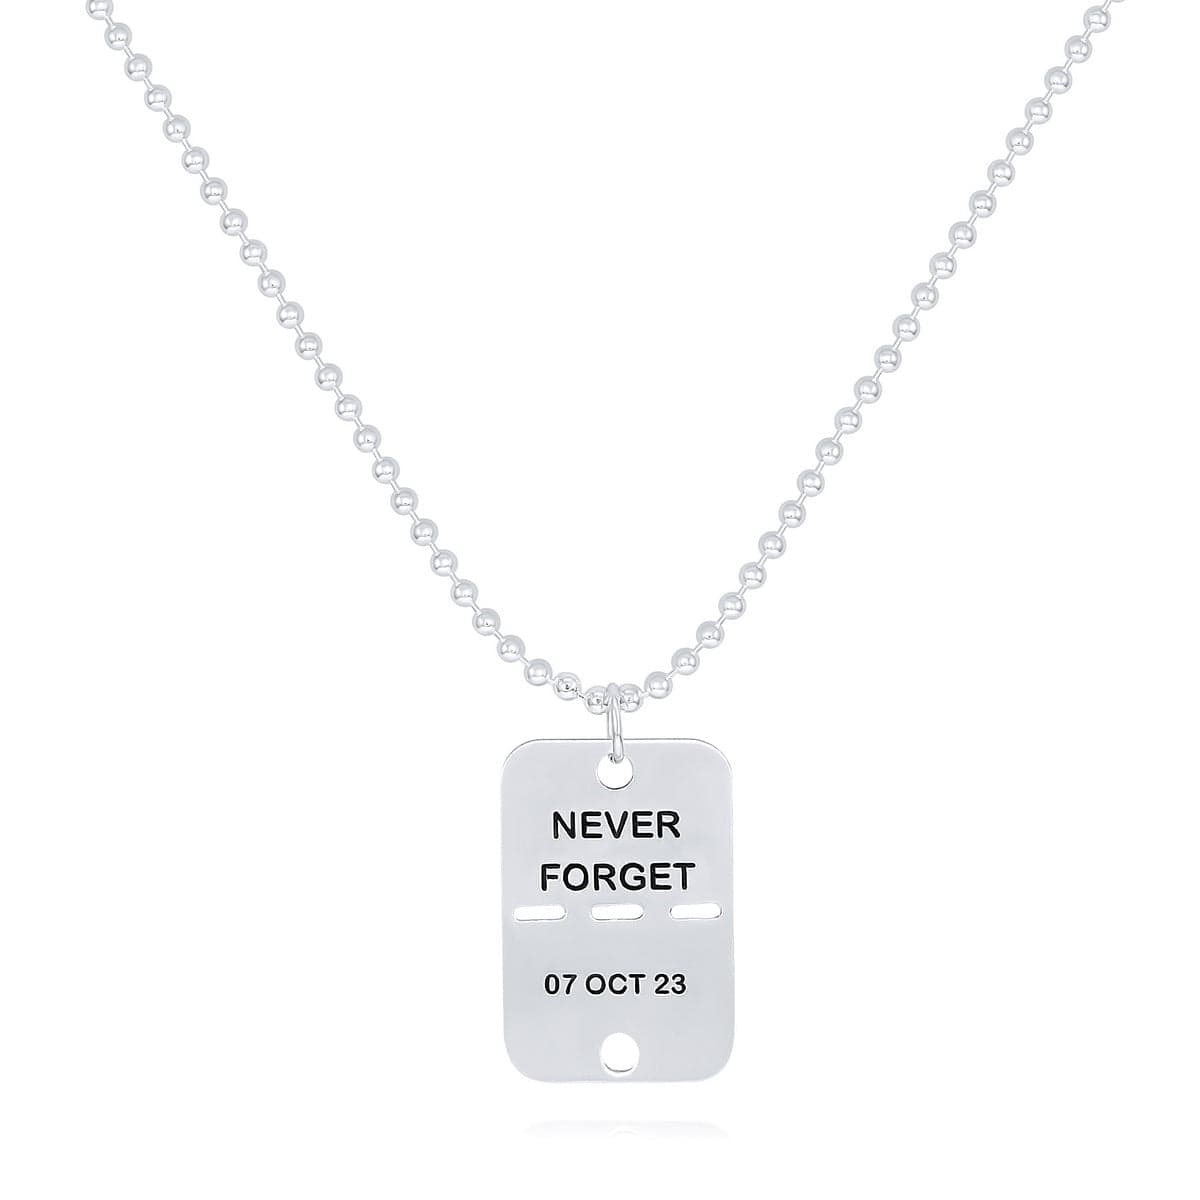 Dalia T Online Sterling Silver Tag - Newer Forget- L